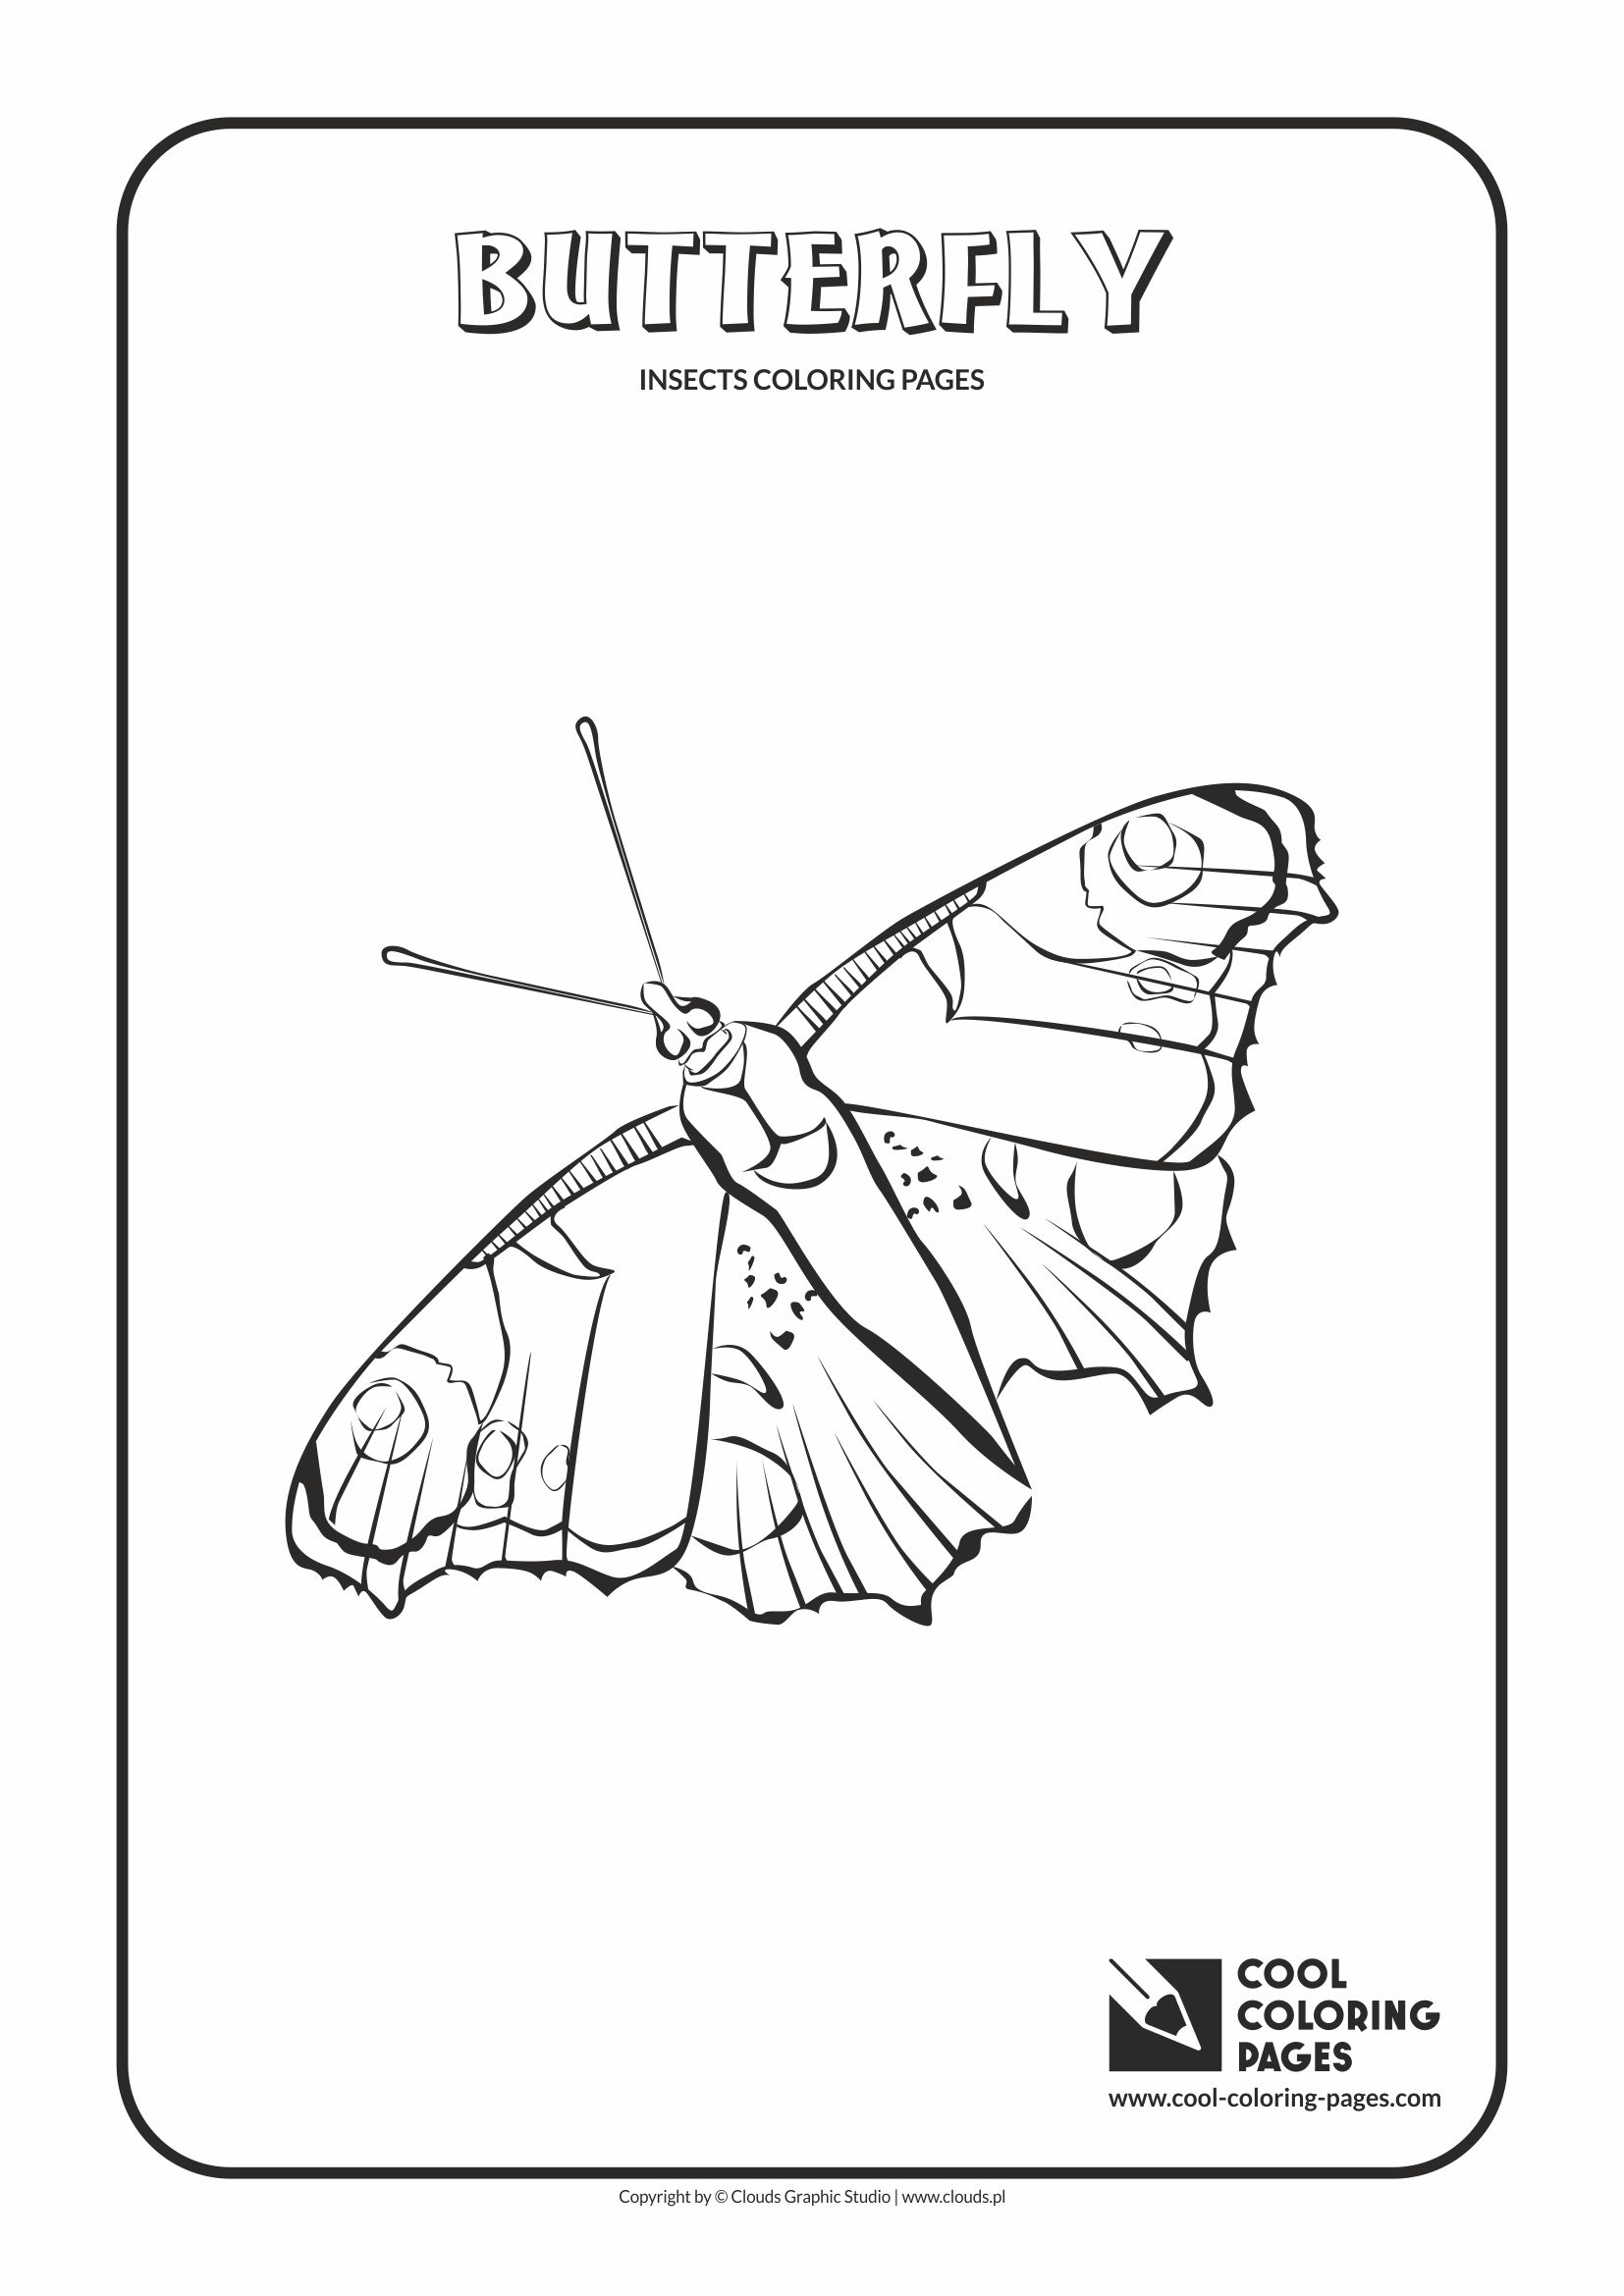 Cool Coloring Pages - Animals / Butterfly / Coloring page with butterfly